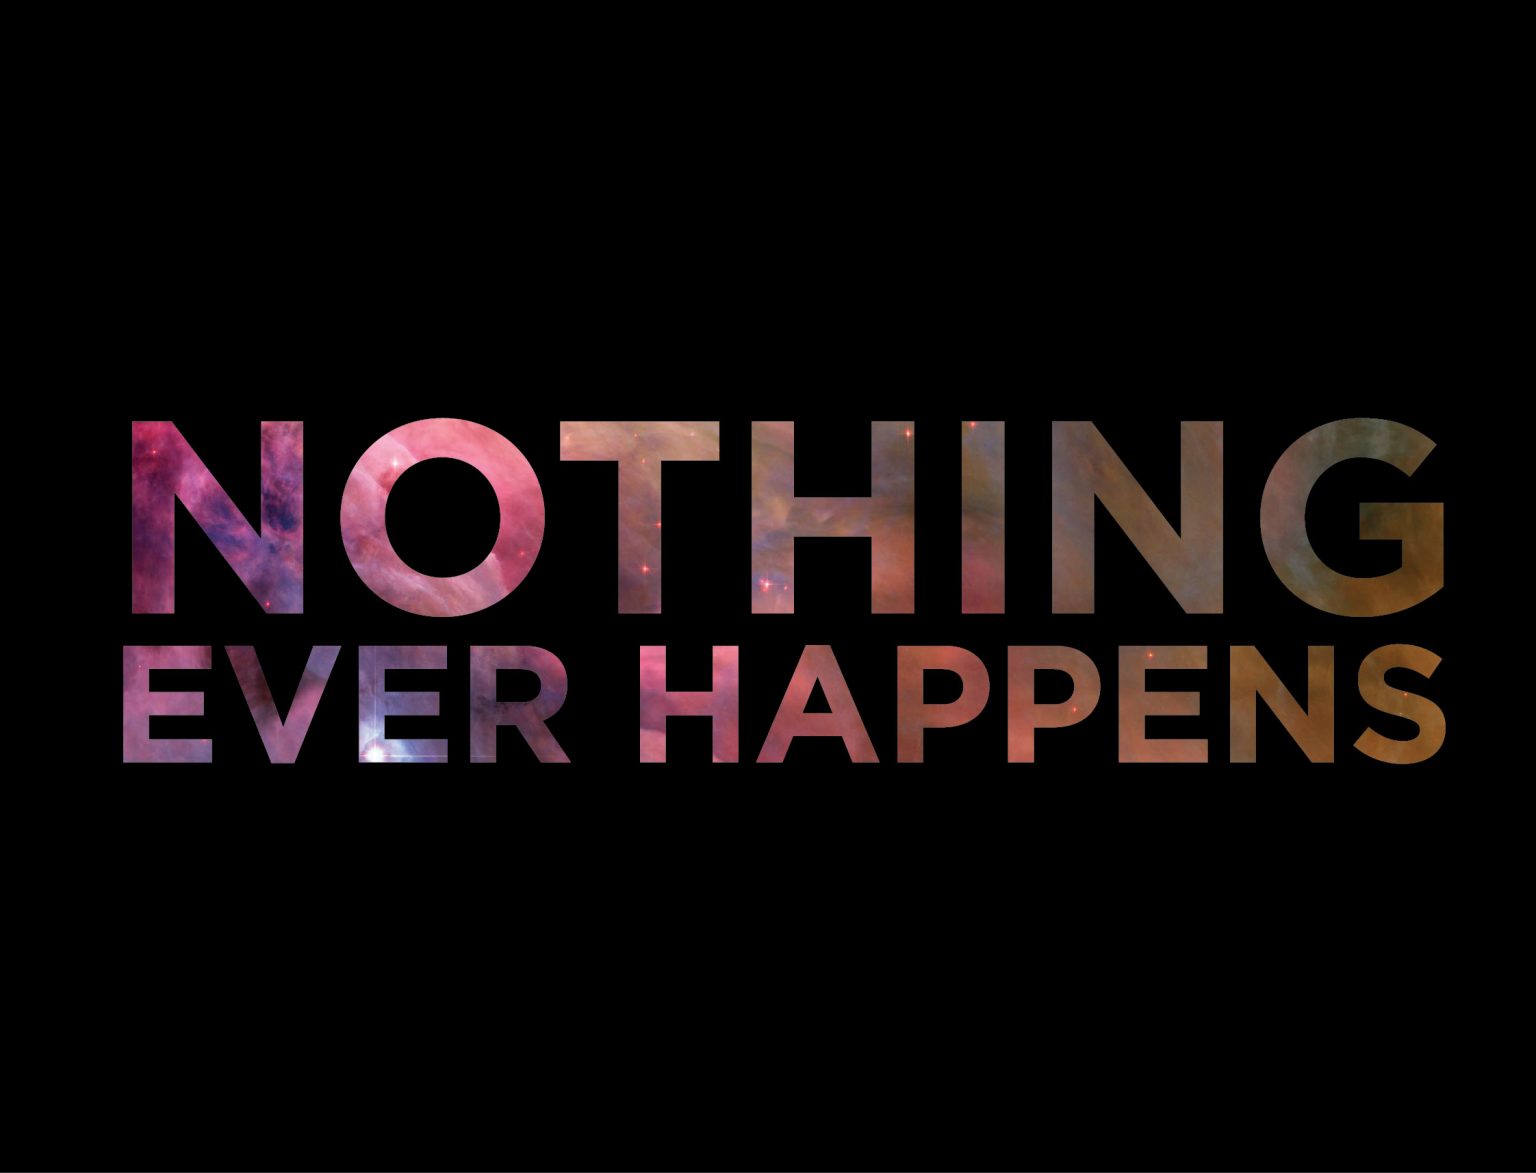 Nothing ever happens. Nothing happened. Nothing ever happens here. Emou nothing ever happens. Happen формы